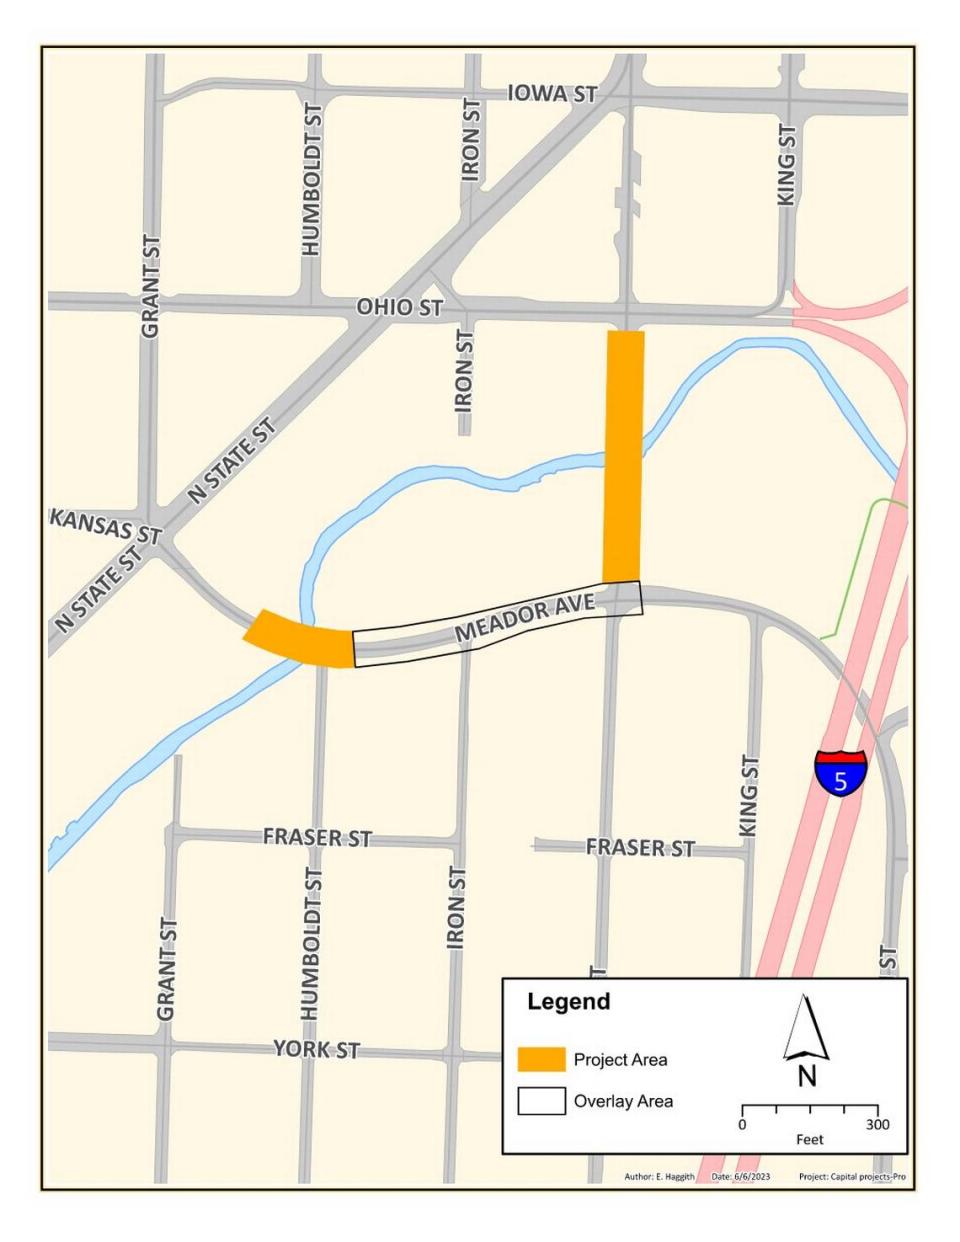 Orange shaded areas show the location of bridges over Whatcom Creek that are scheduled for replacement starting in May 2024.